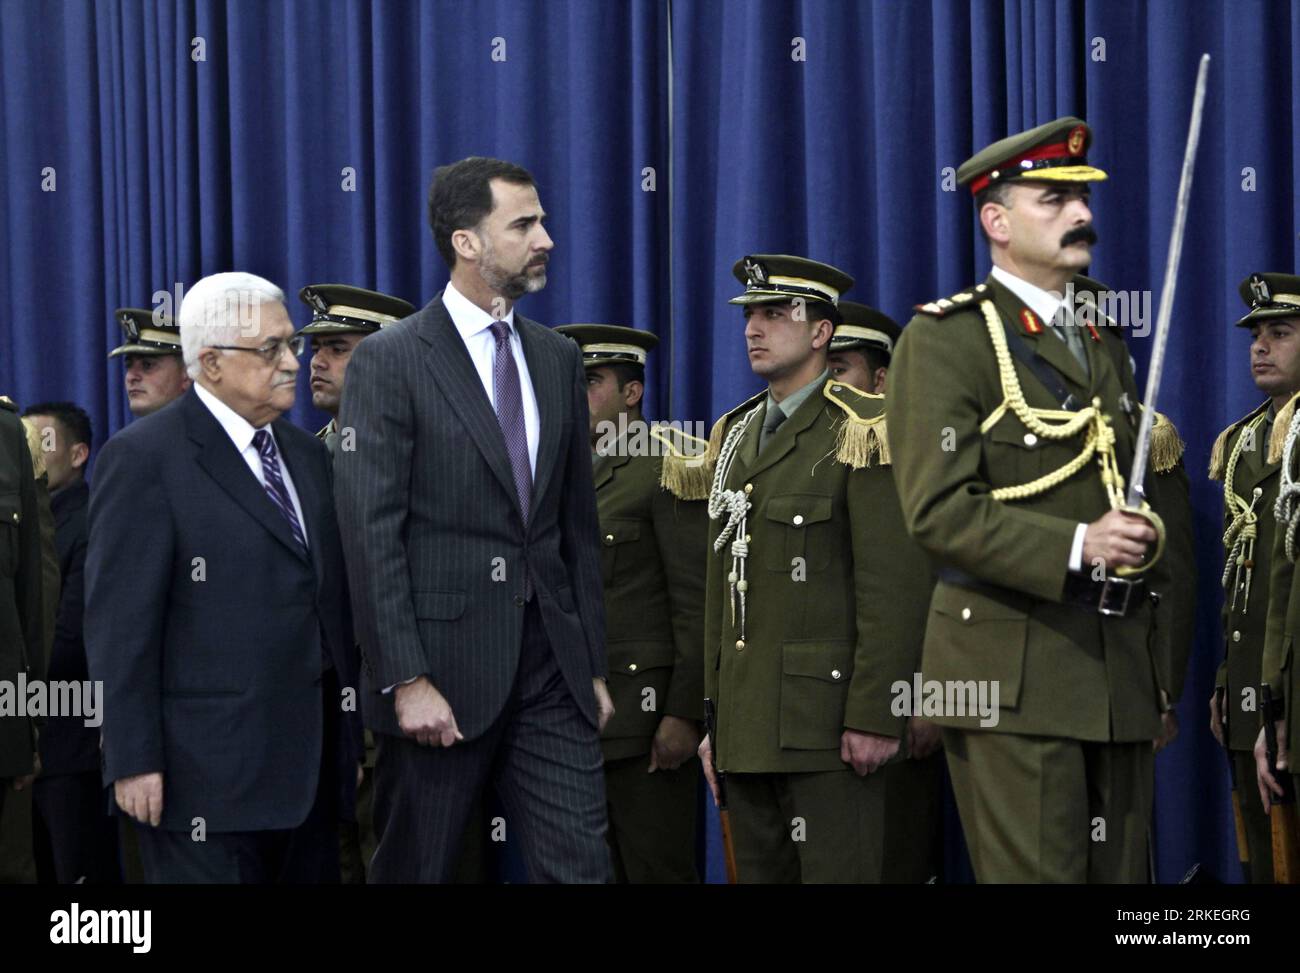 Bildnummer: 55255901  Datum: 12.04.2011  Copyright: imago/Xinhua (110412)-- WEST BANK, APRIL 12, 2011 (Xinhua) -- Spanish Crown Prince Felipe de Borbon(2nd L) and Palestinian president Mahmoud Abbas(1st L) review the honor guards upon Felipe s arrival in the West Bank city of Ramallah, on April 12, 2011. Felipe and his wife were in a short visit to the region. (Xinhua/Fadi Arouri) MIDEAST-WEST BANK-SPAIN-CROWN-PRINCE-FELIPE PUBLICATIONxNOTxINxCHN People Politik kbdig xkg 2011 quer o0 Adel Königshaus Spanien    Bildnummer 55255901 Date 12 04 2011 Copyright Imago XINHUA  WEST Bank April 12 2011 Stock Photo